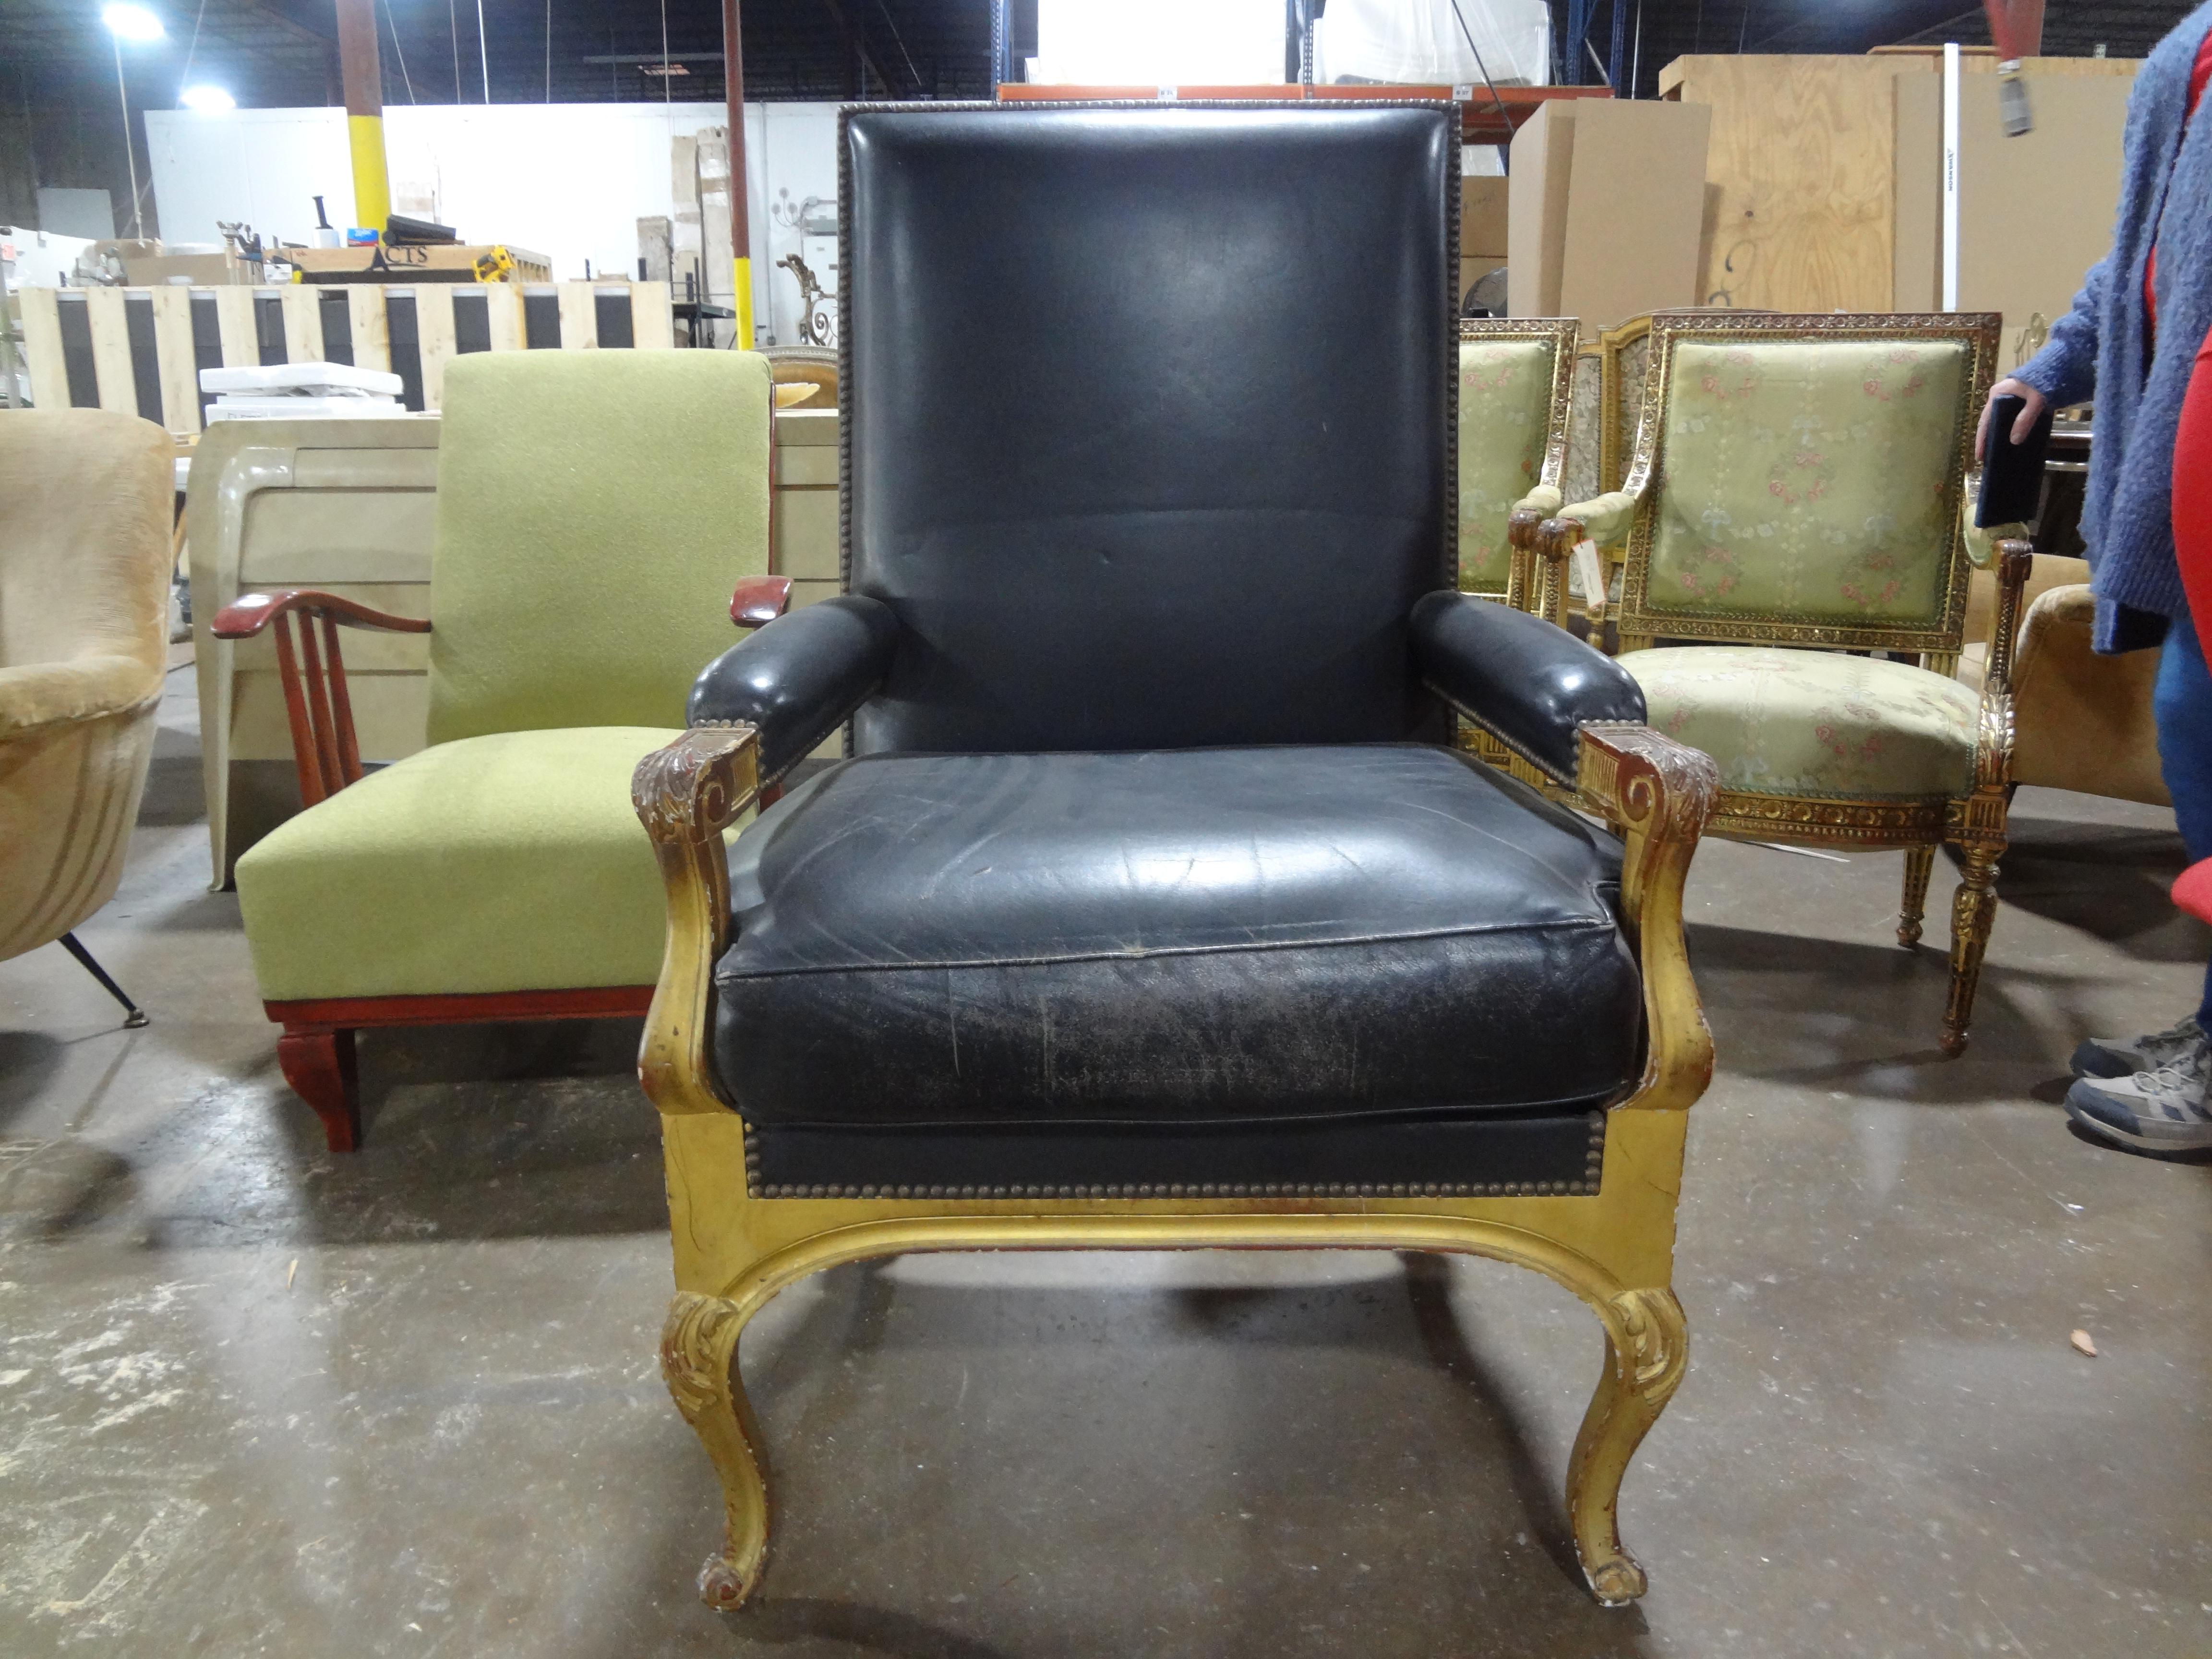 French Maison Jansen Louis XVI Style Giltwood Fauteuil.
Our handsome large French Louis XVI style gilt wood fauteuil or arm chair is upholstered in distressed black leather and is the perfect side chair or desk chair.  Great chair for a large